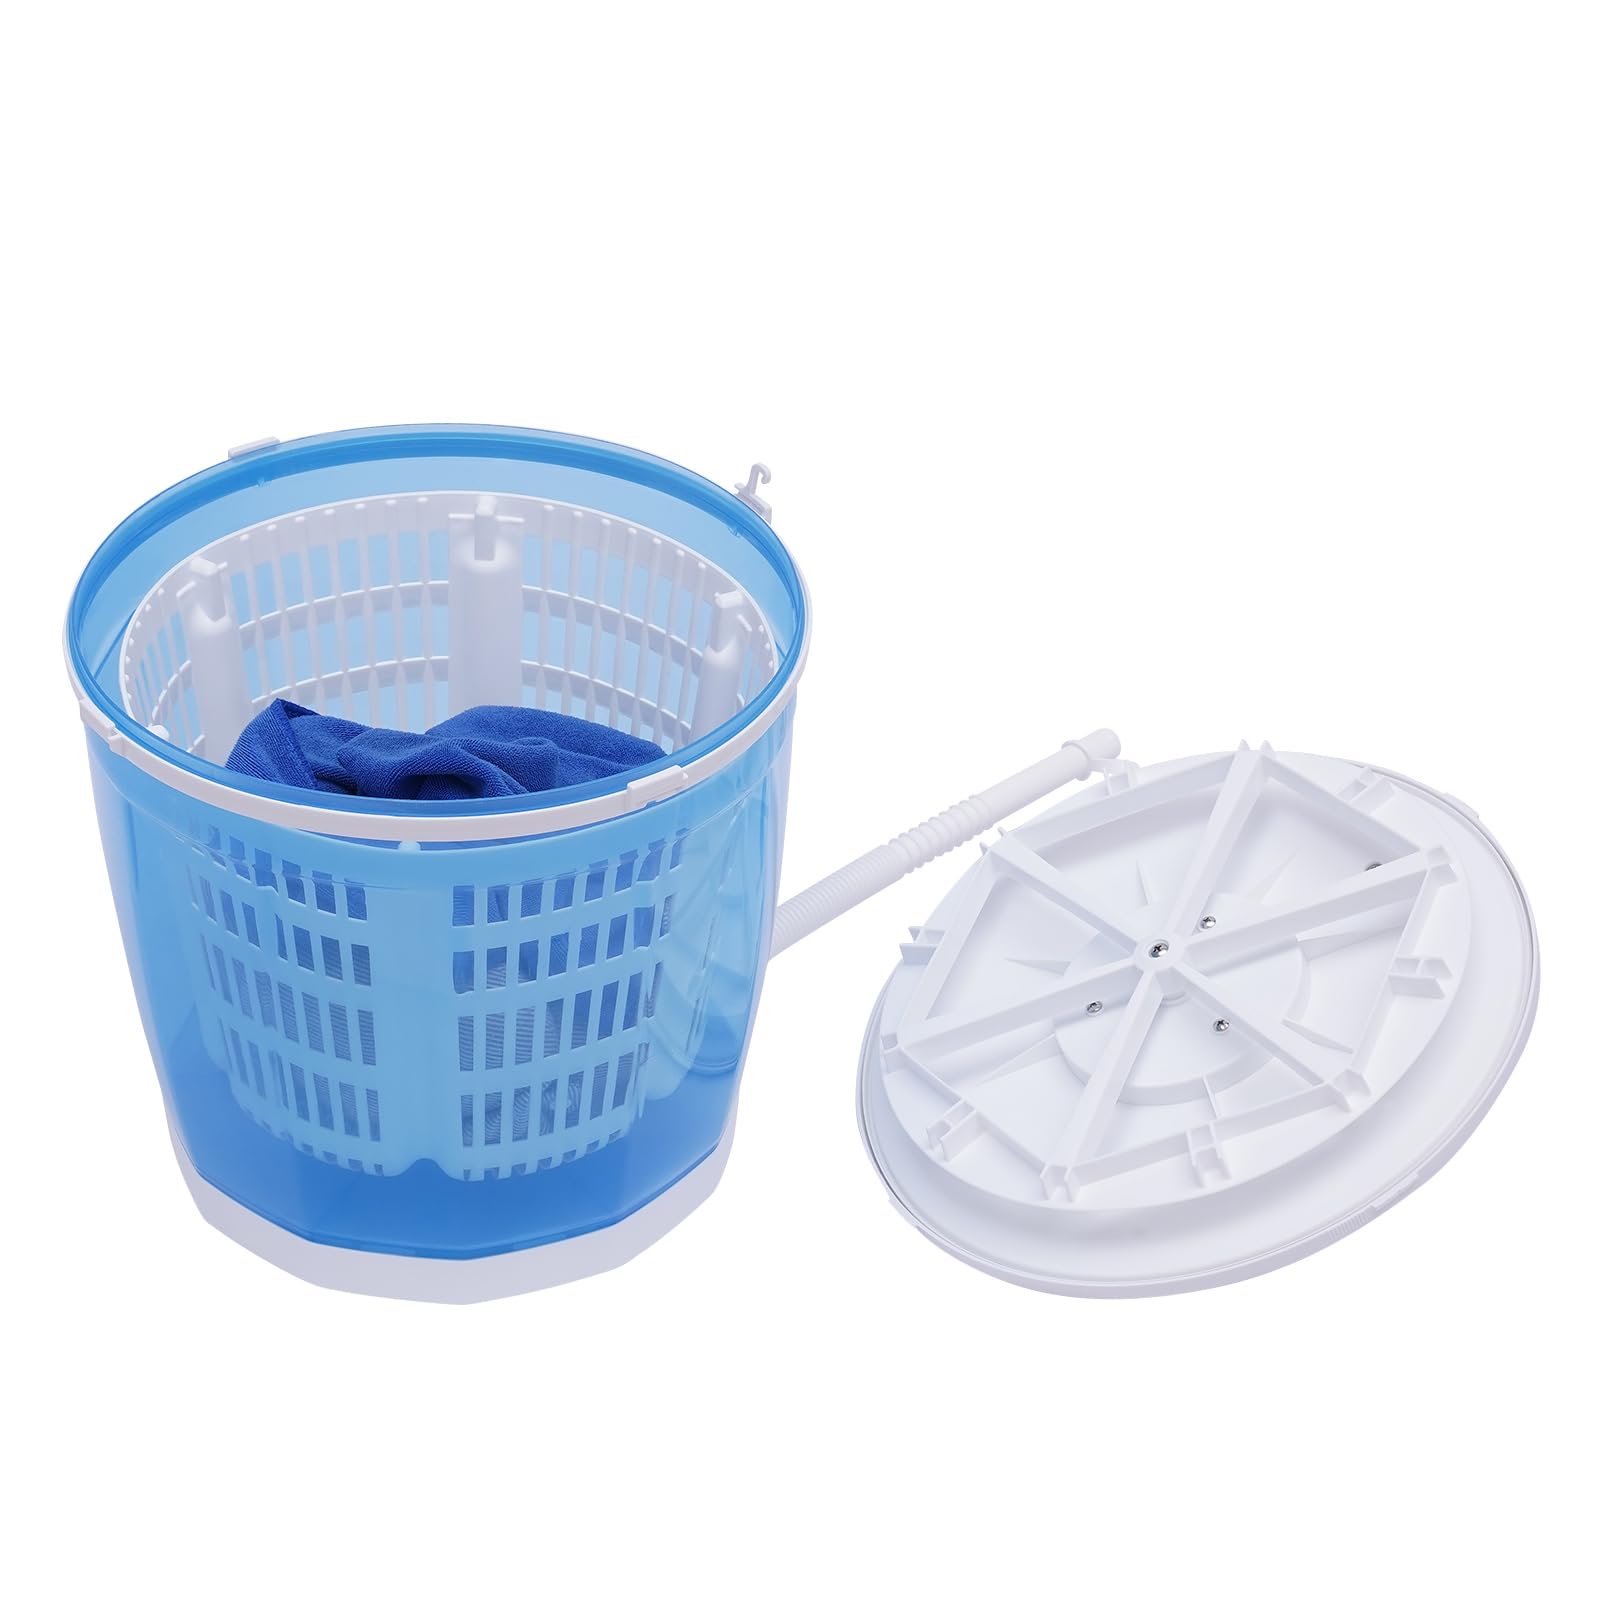 Mini Spin Dryer & Manual Washing Machine,2 in 1 Non-Electric Clothes Spin Dryer,Traveling Manual Outdoor Washer Spin Dryer